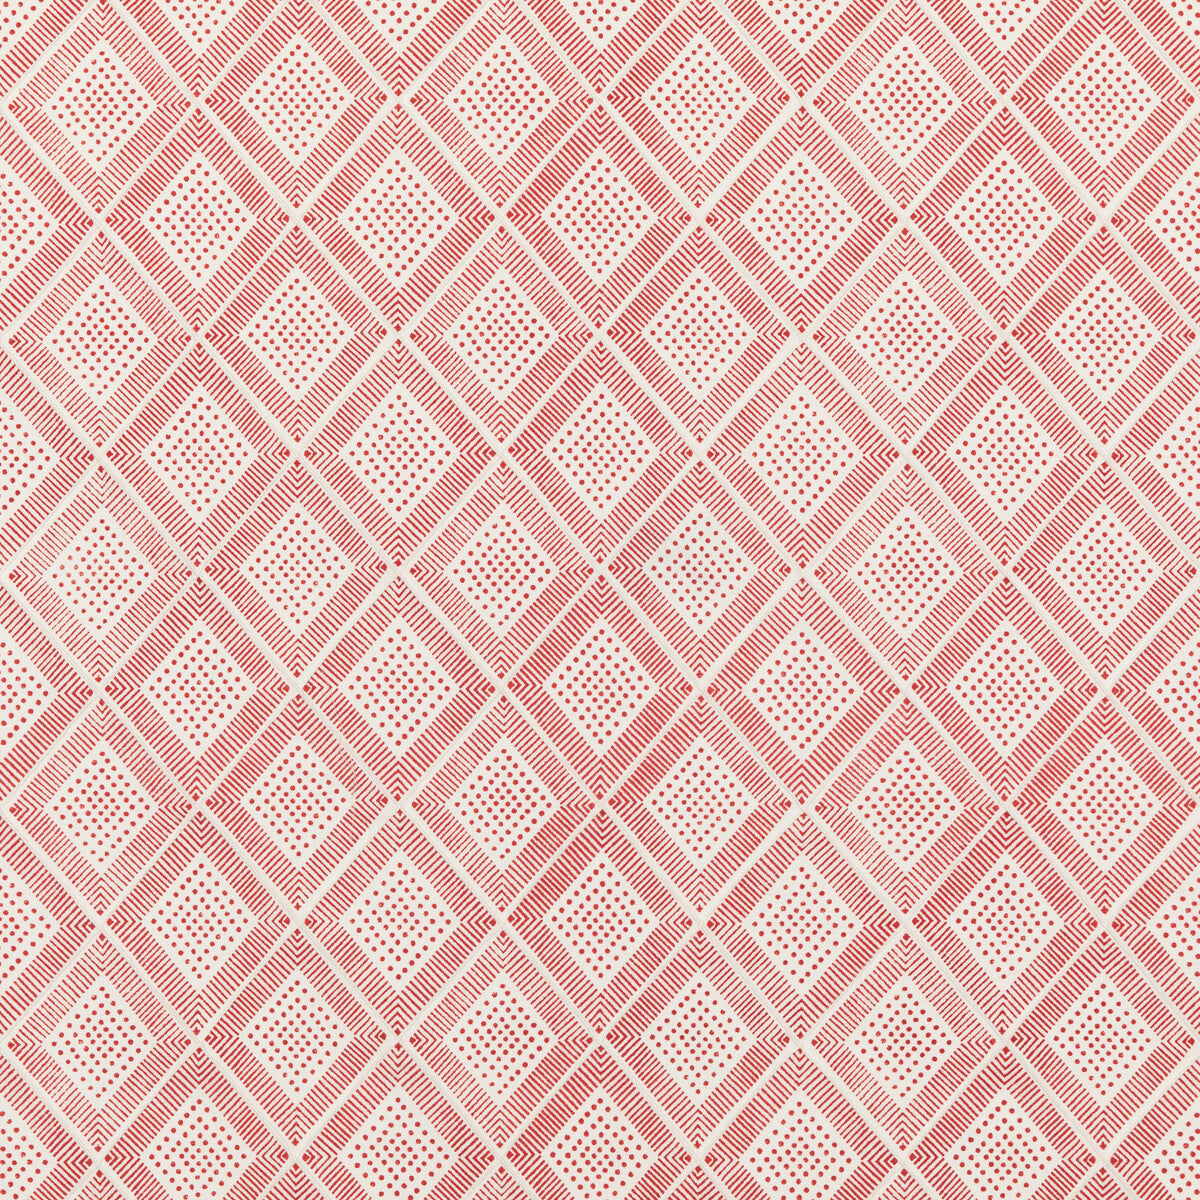 Block Trellis fabric in rustic red color - pattern PP50484.2.0 - by Baker Lifestyle in the Block Party collection